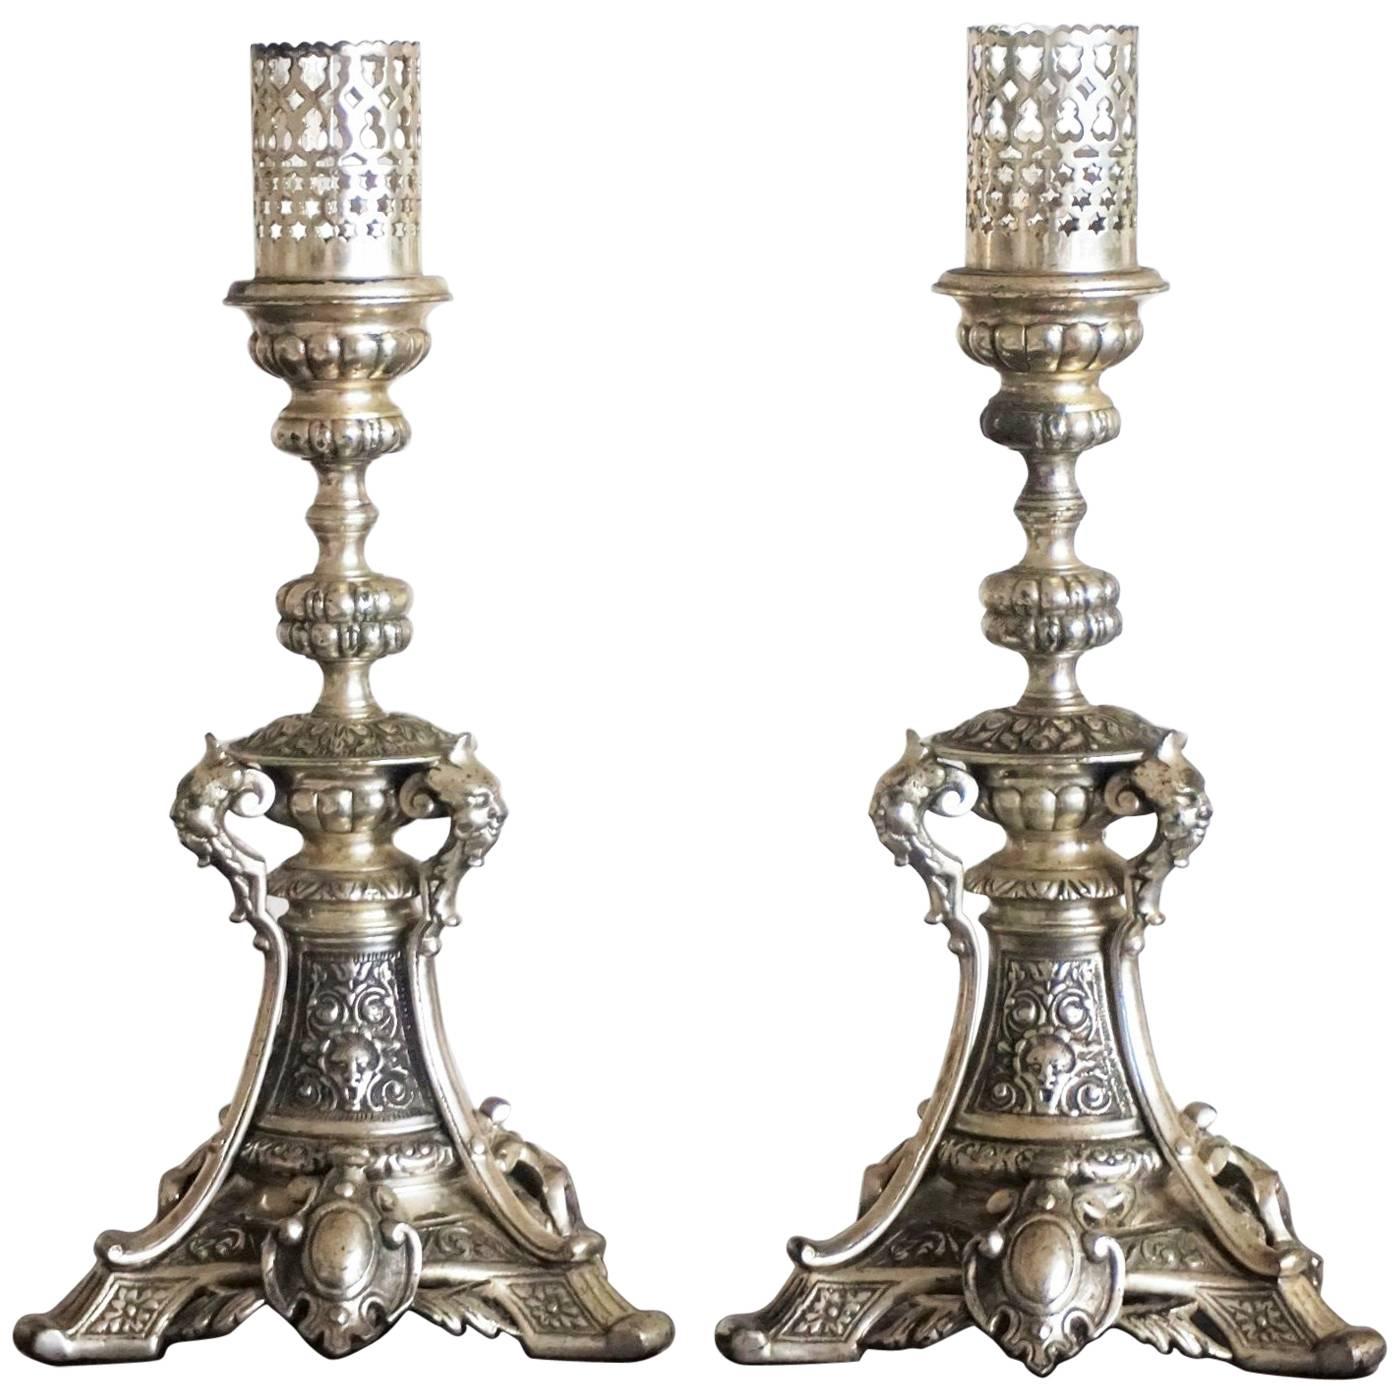 19th Century Pair of Silver Plated Candlesticks with Gothic Ornaments Candelabra